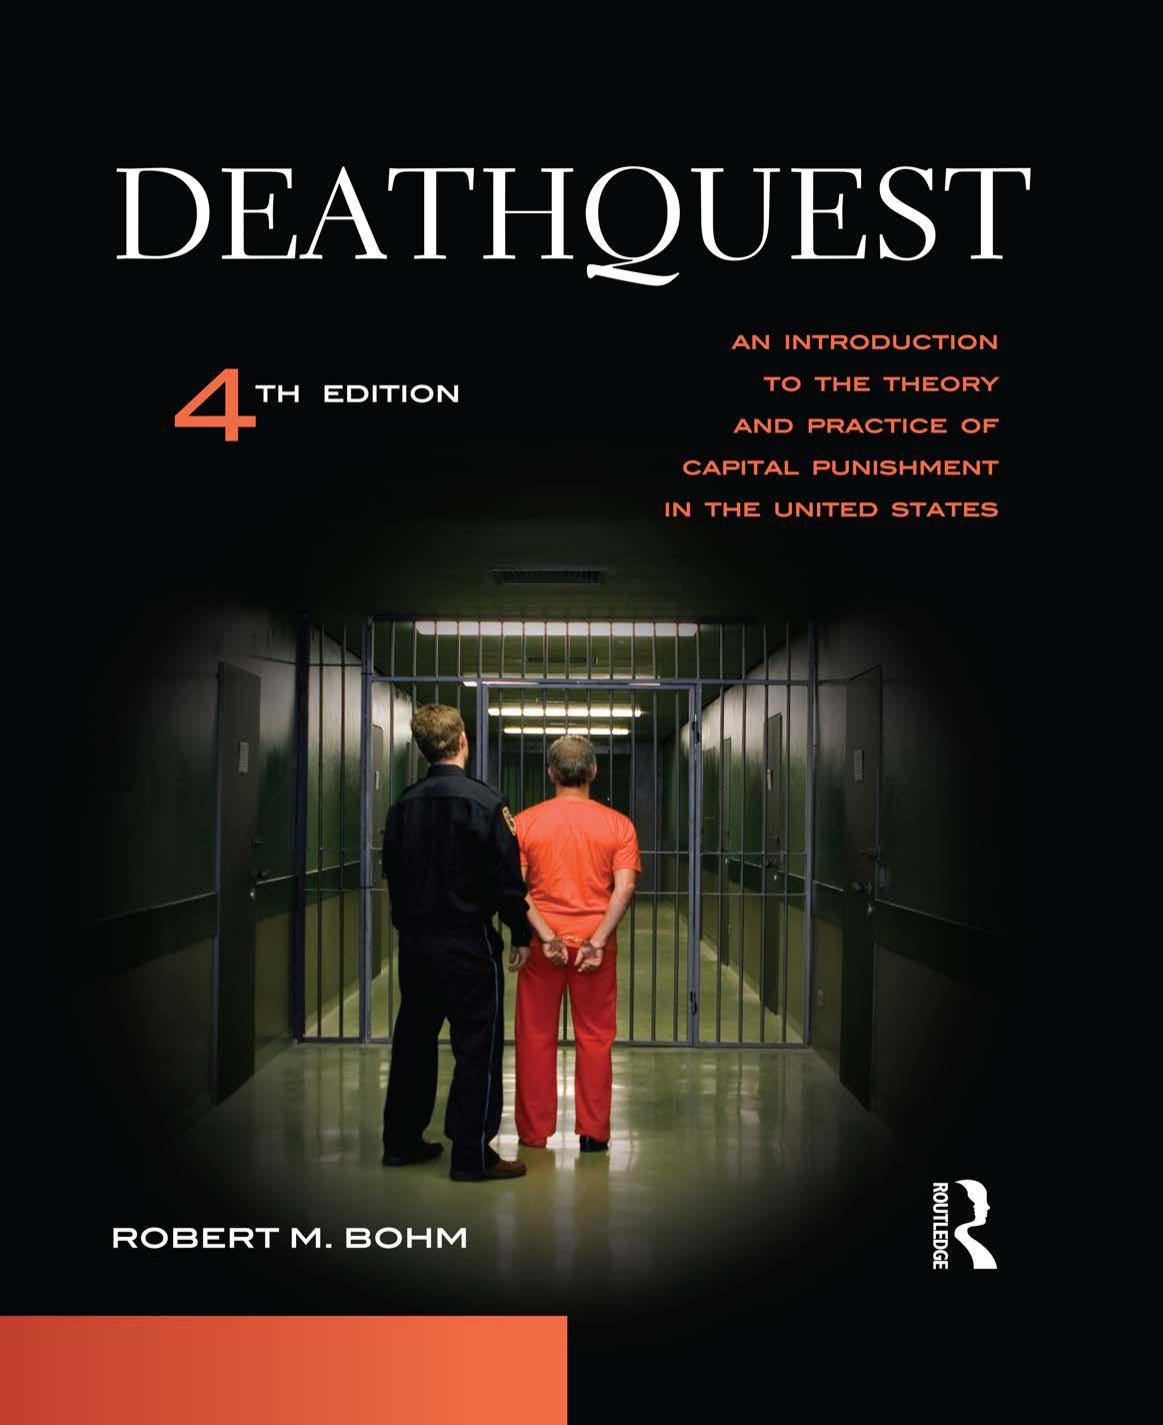 DeathQuest An Introduction to the Theory and Practice of Capital Punishment 4e.jpg